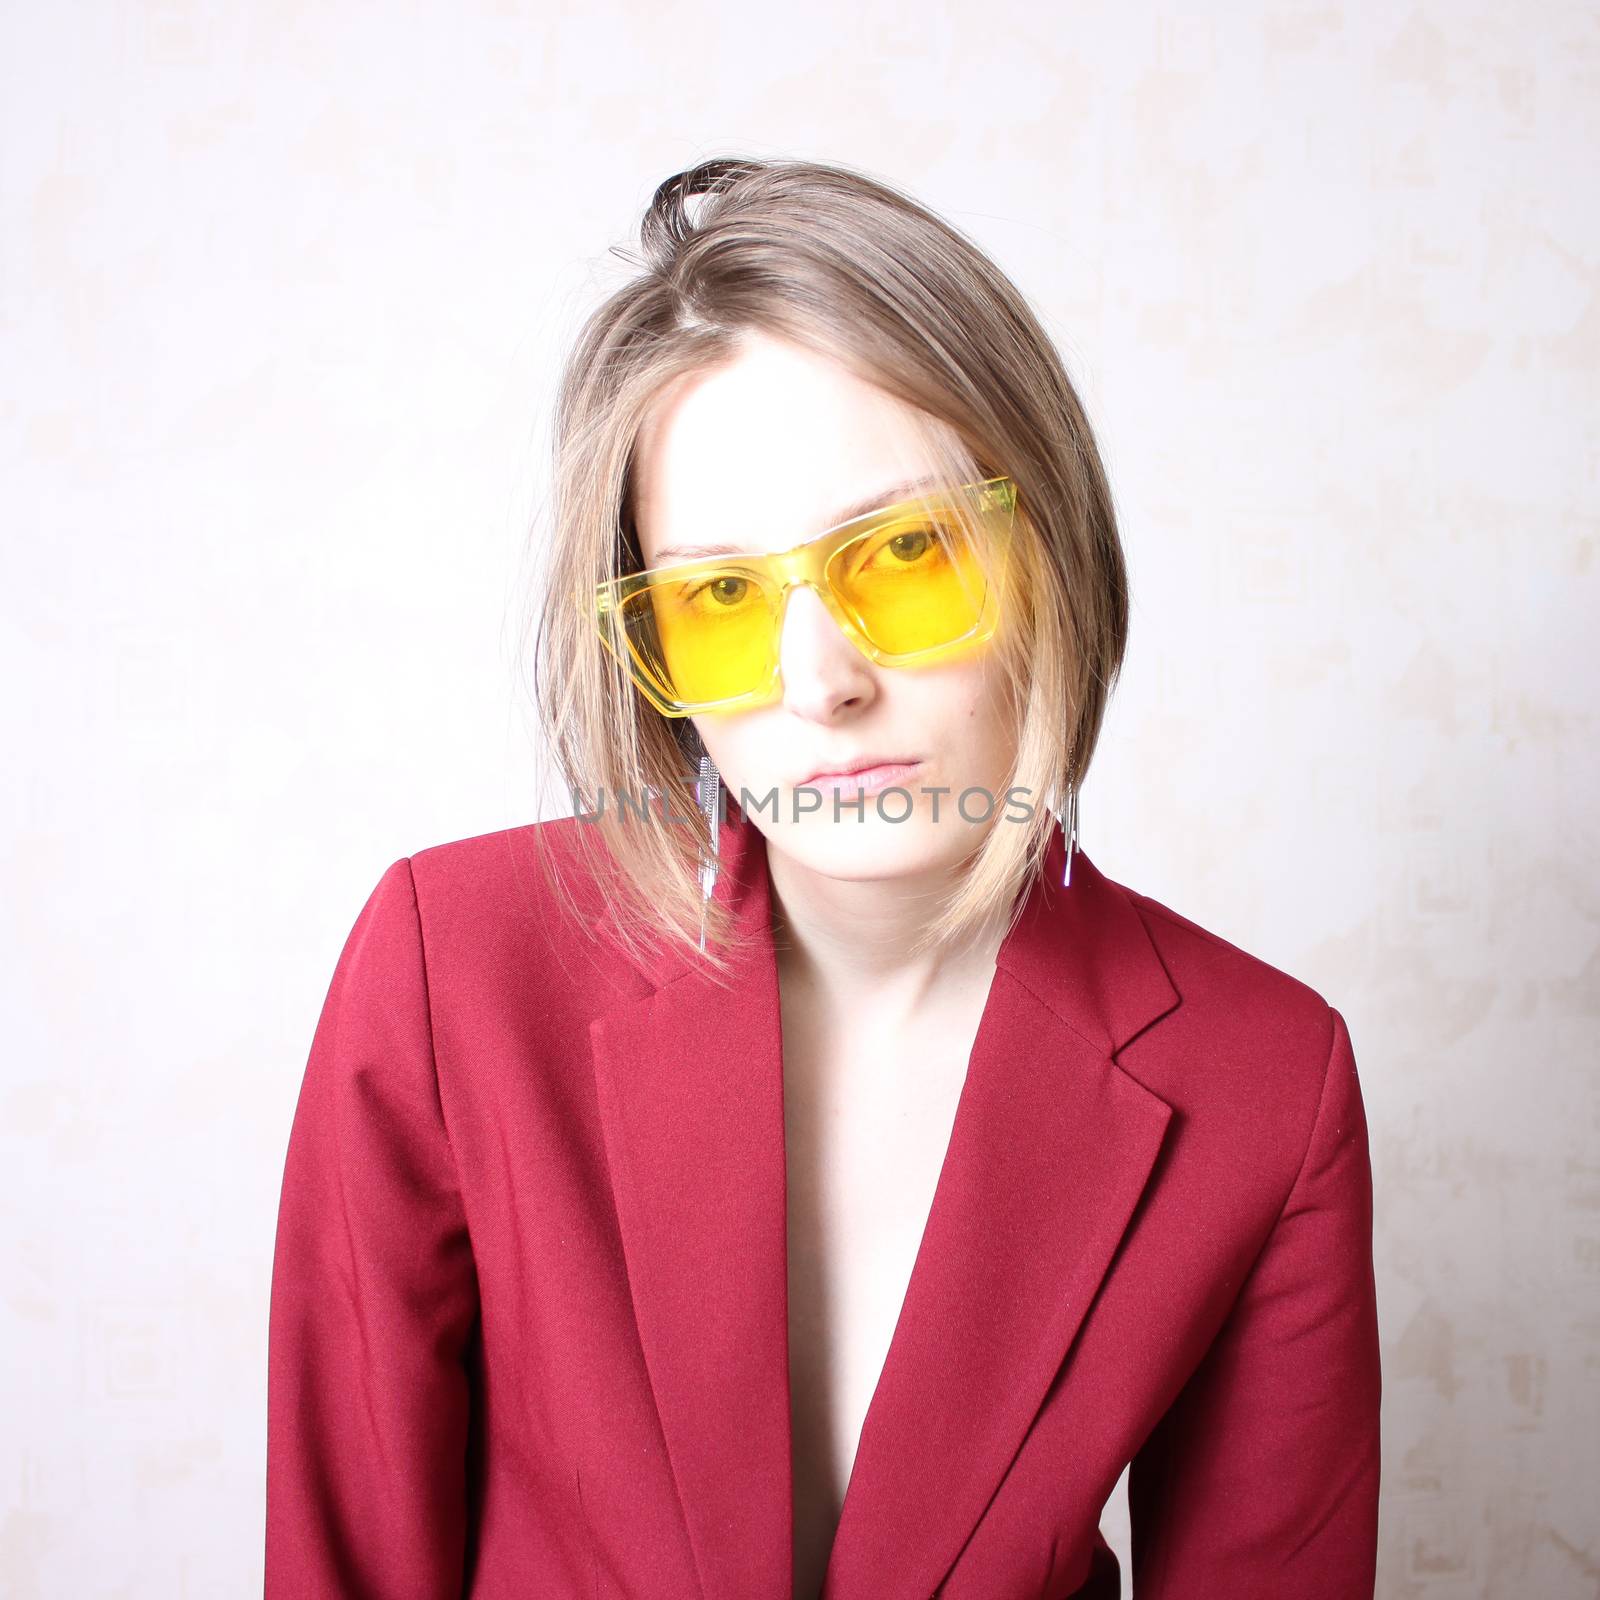 Bright portrait of a girl in yellow glasses. Serious facial expression